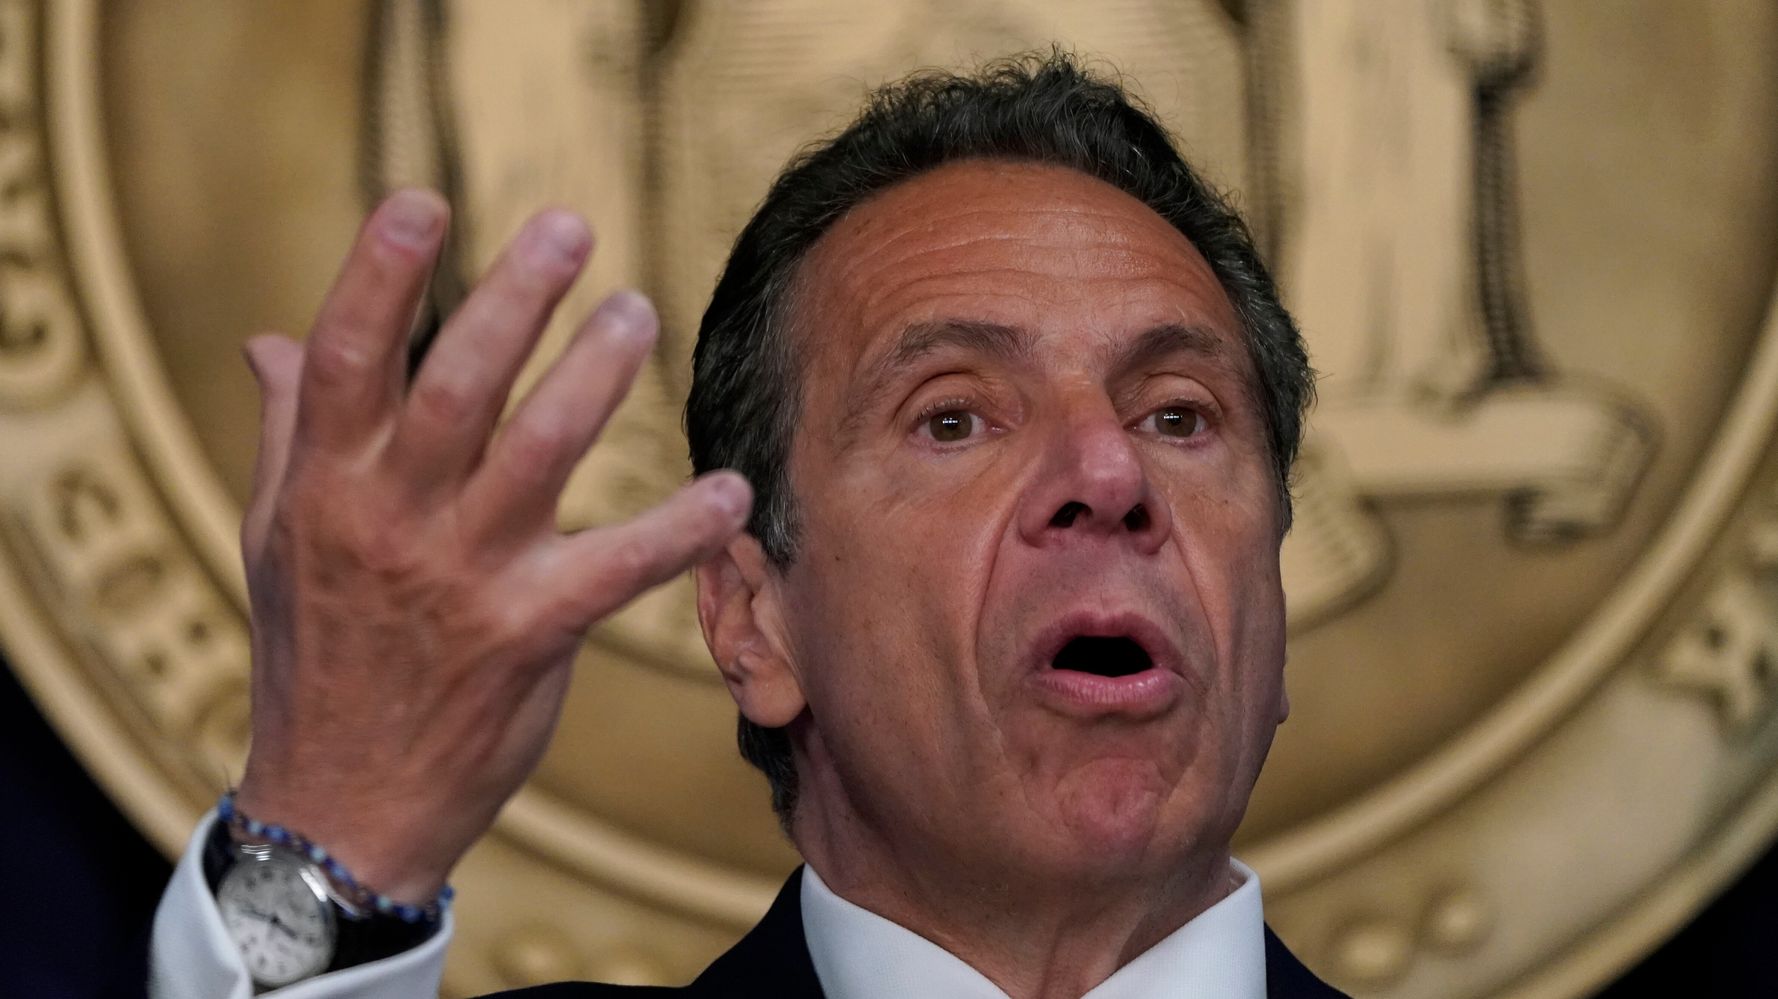 New York Gov. Andrew Cuomo Set To Earn $5 Million From COVID-19 Book